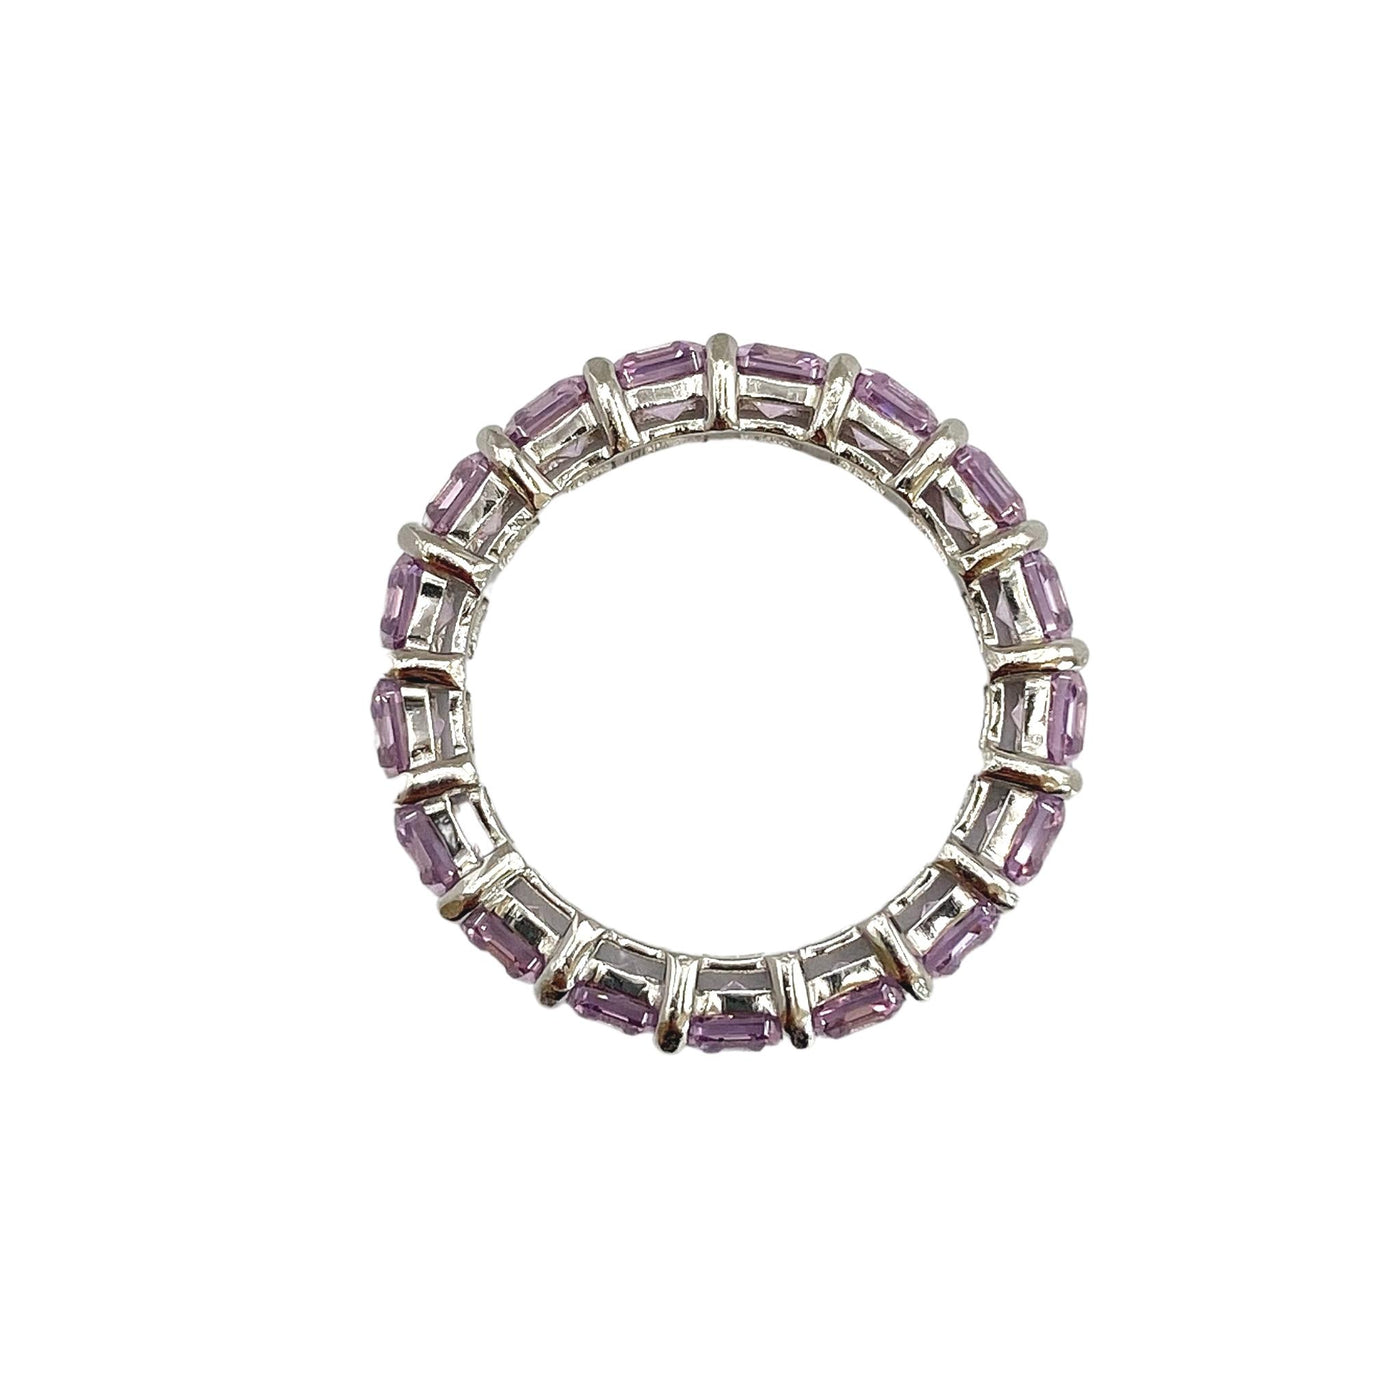 Silver eternity ring with asscher-cut stones